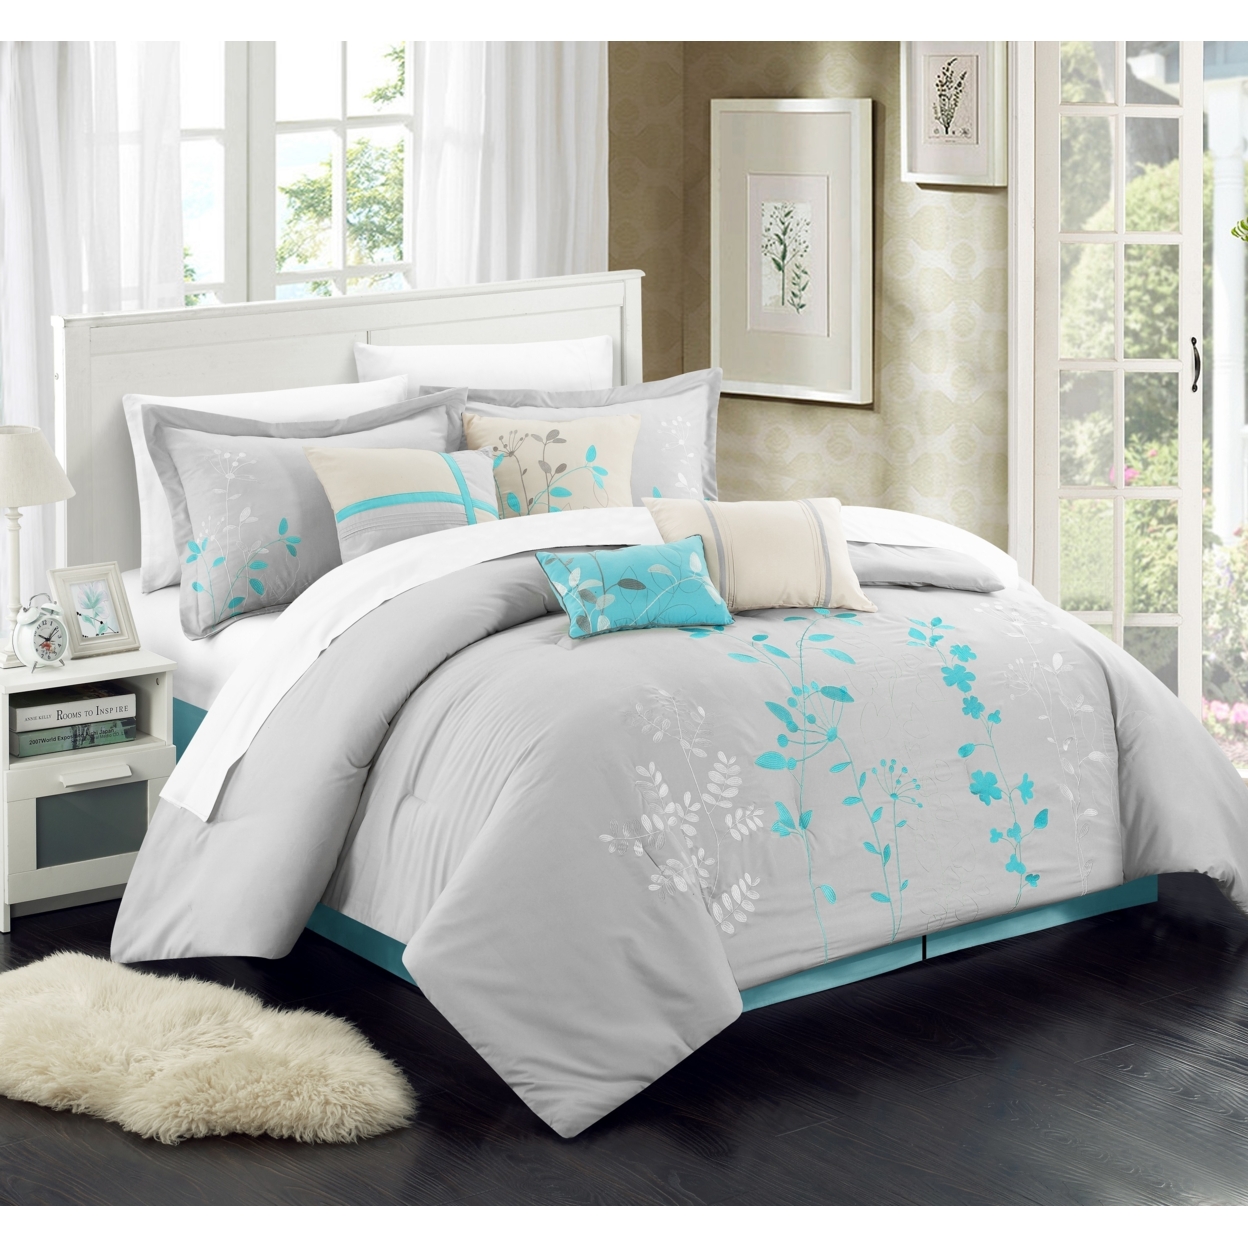 Brooke 8-Piece Embroidered Bed Comforter Set - Turquoise, Queen